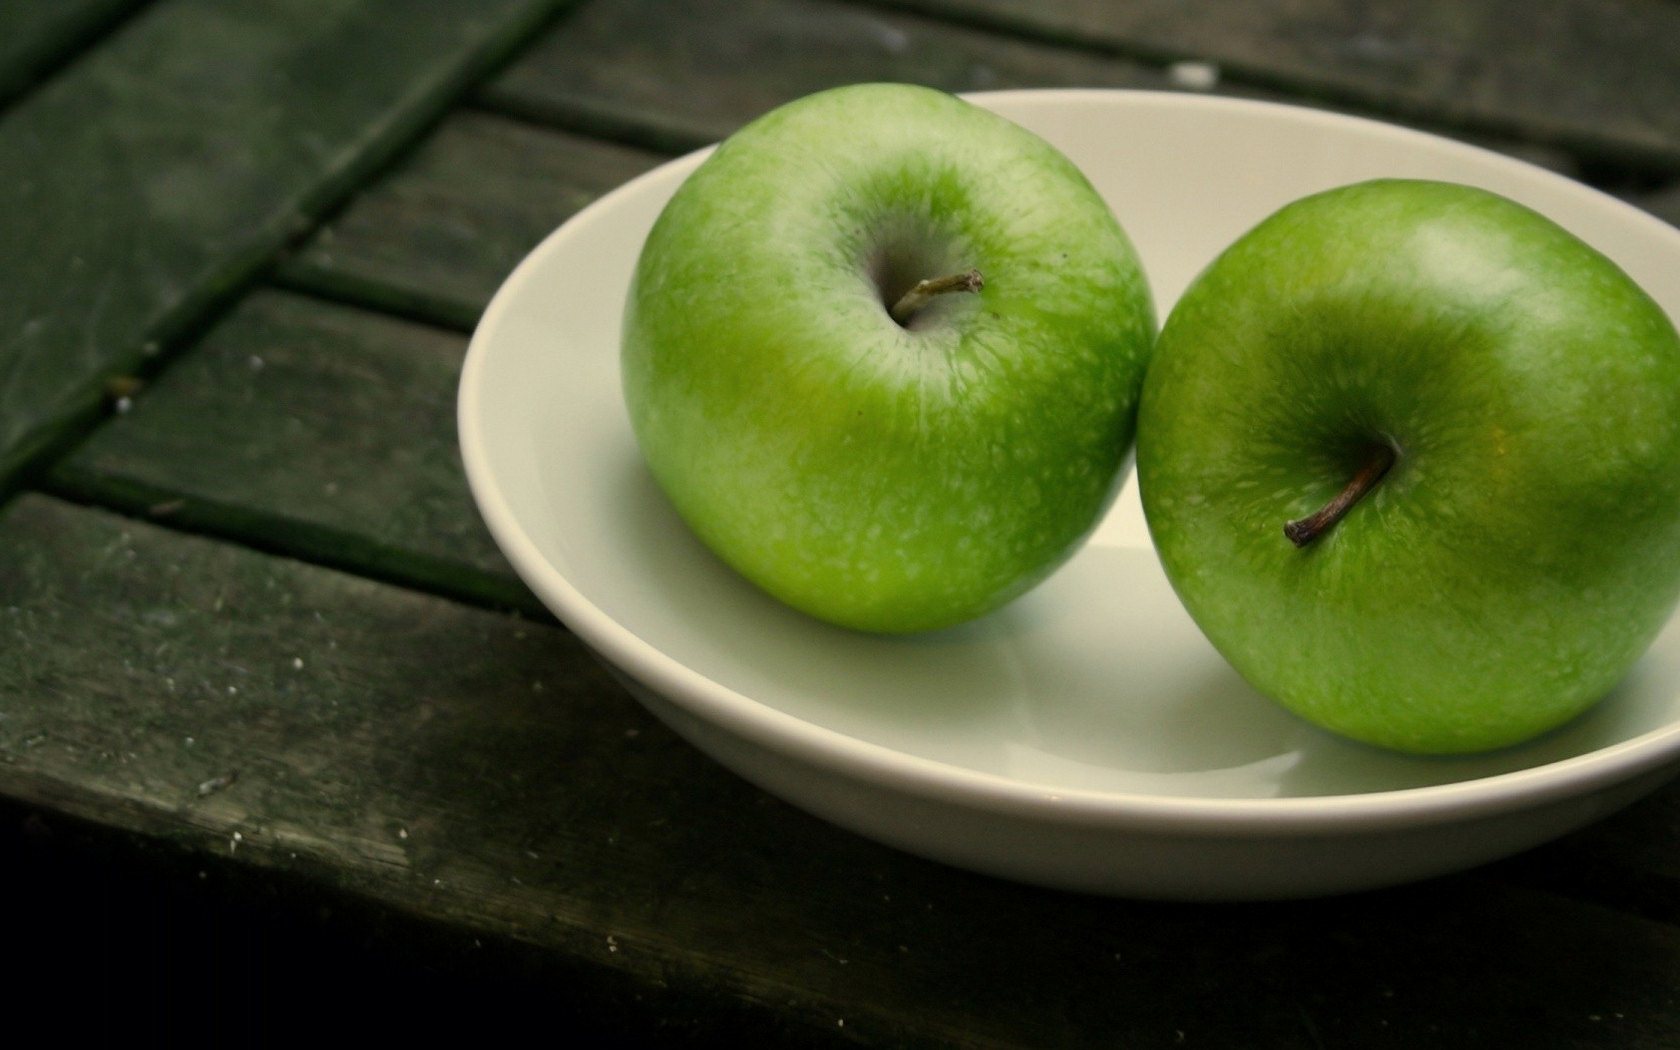 green apples wallpaper background, wallpapers